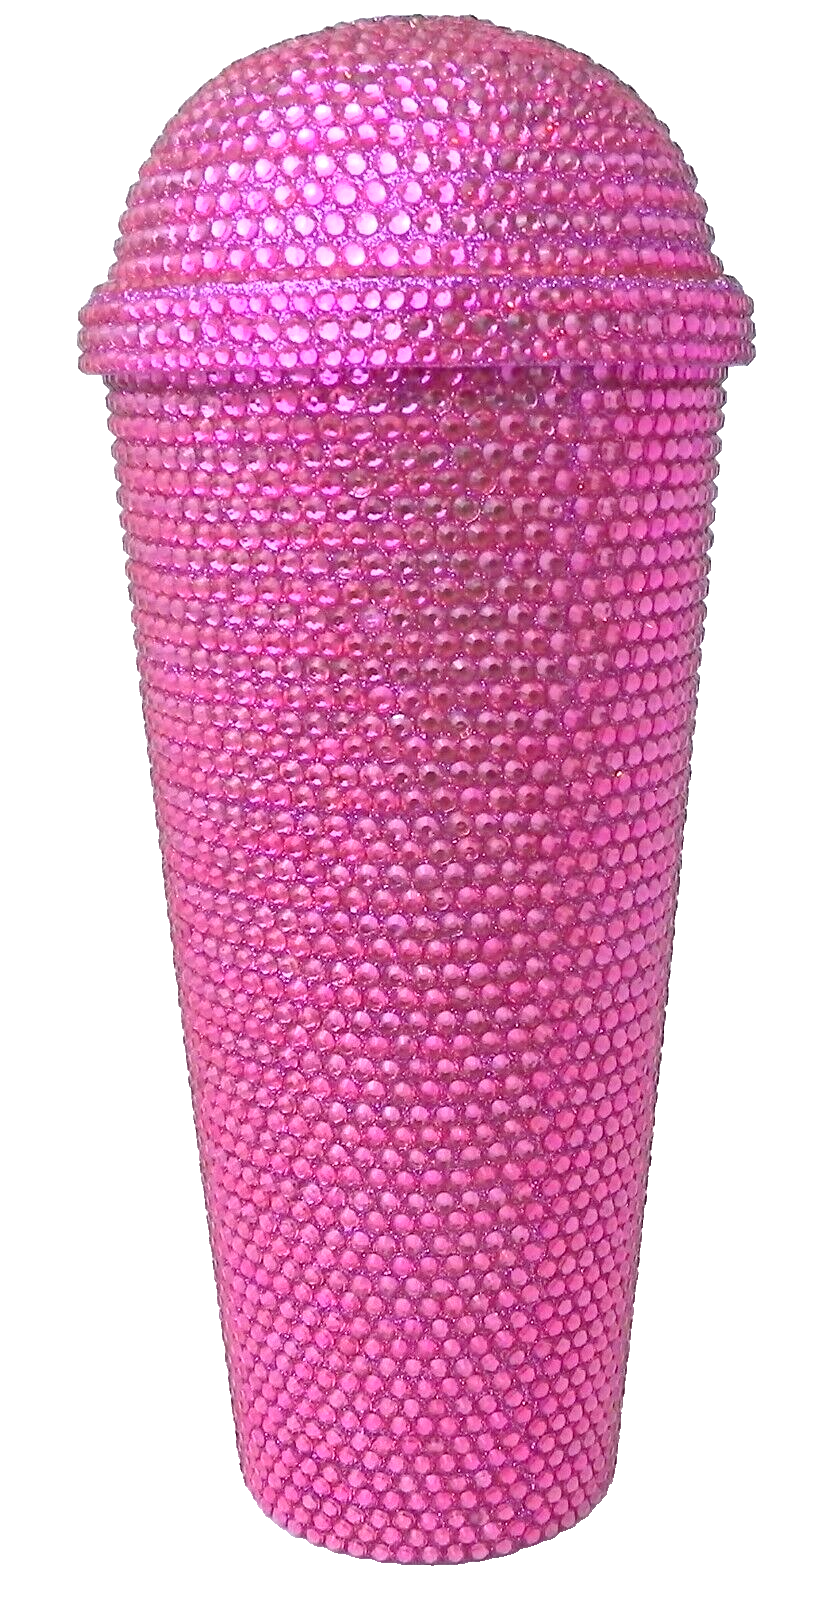 Fuchsia Pink Rhinestone Bling Water Bottle Cup with Lid - No Straw - 24 oz